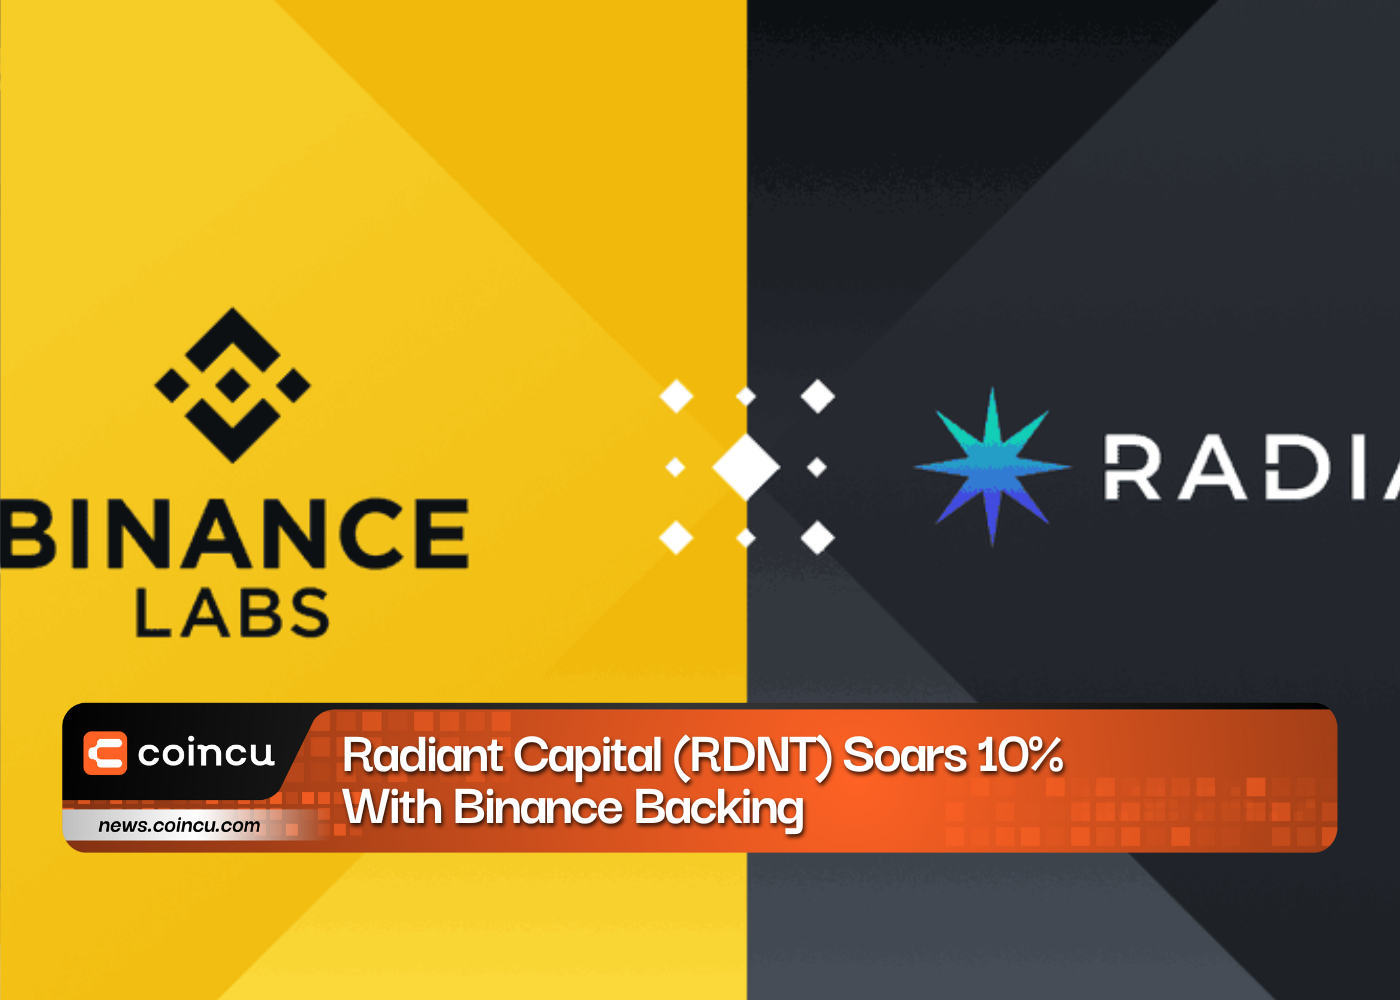 Radiant Capital (RDNT) Soars 10% With Binance Backing